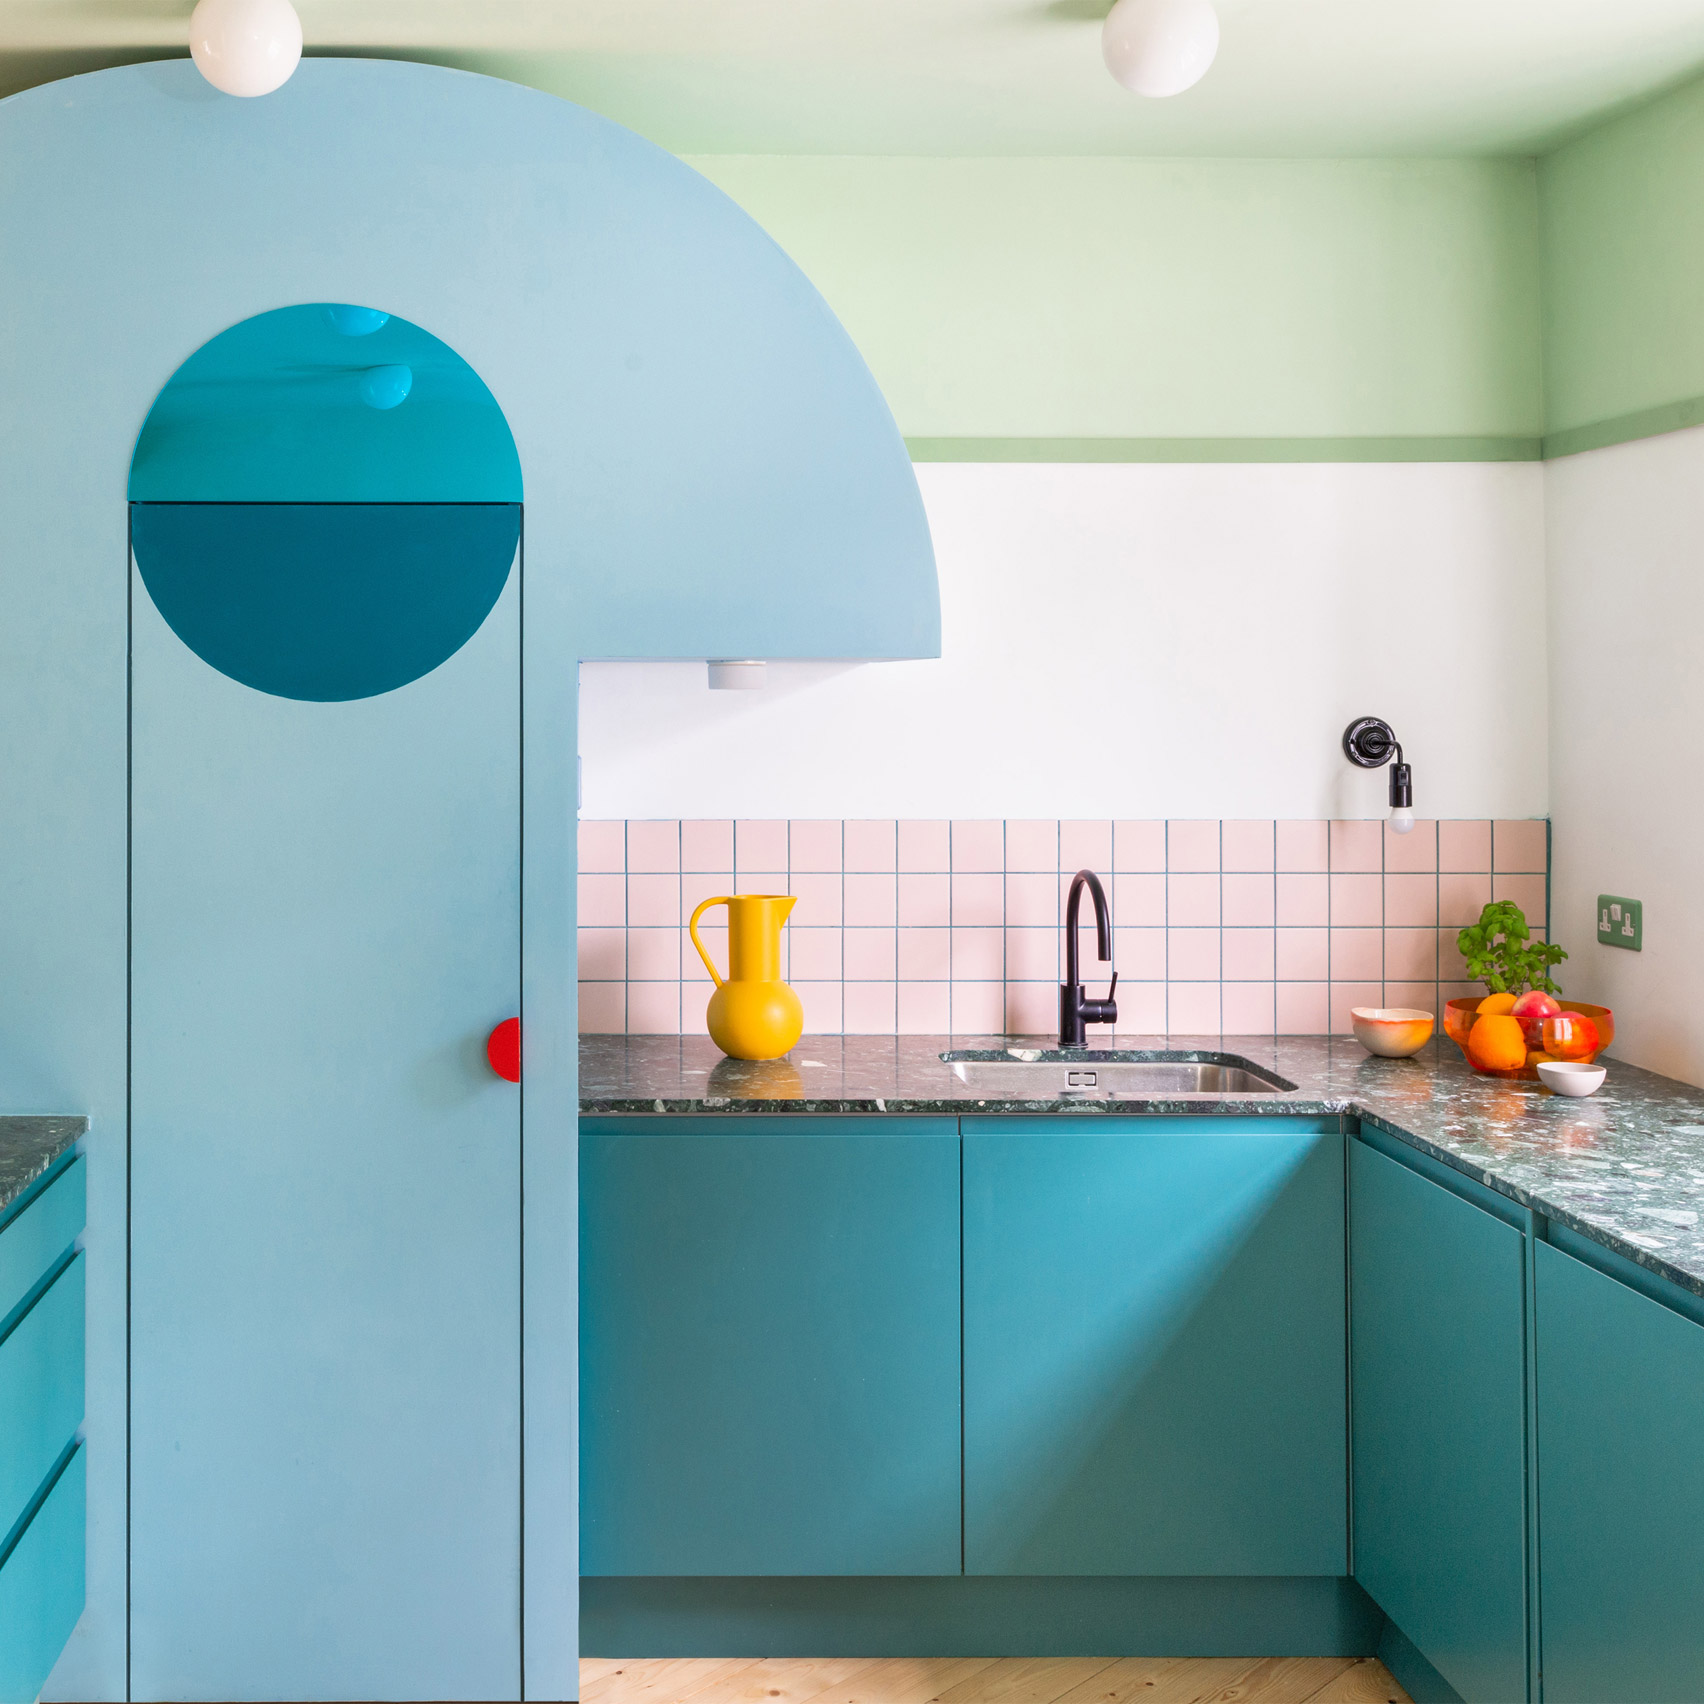 A colourful kitchen with blue cabinetry and pink tiles